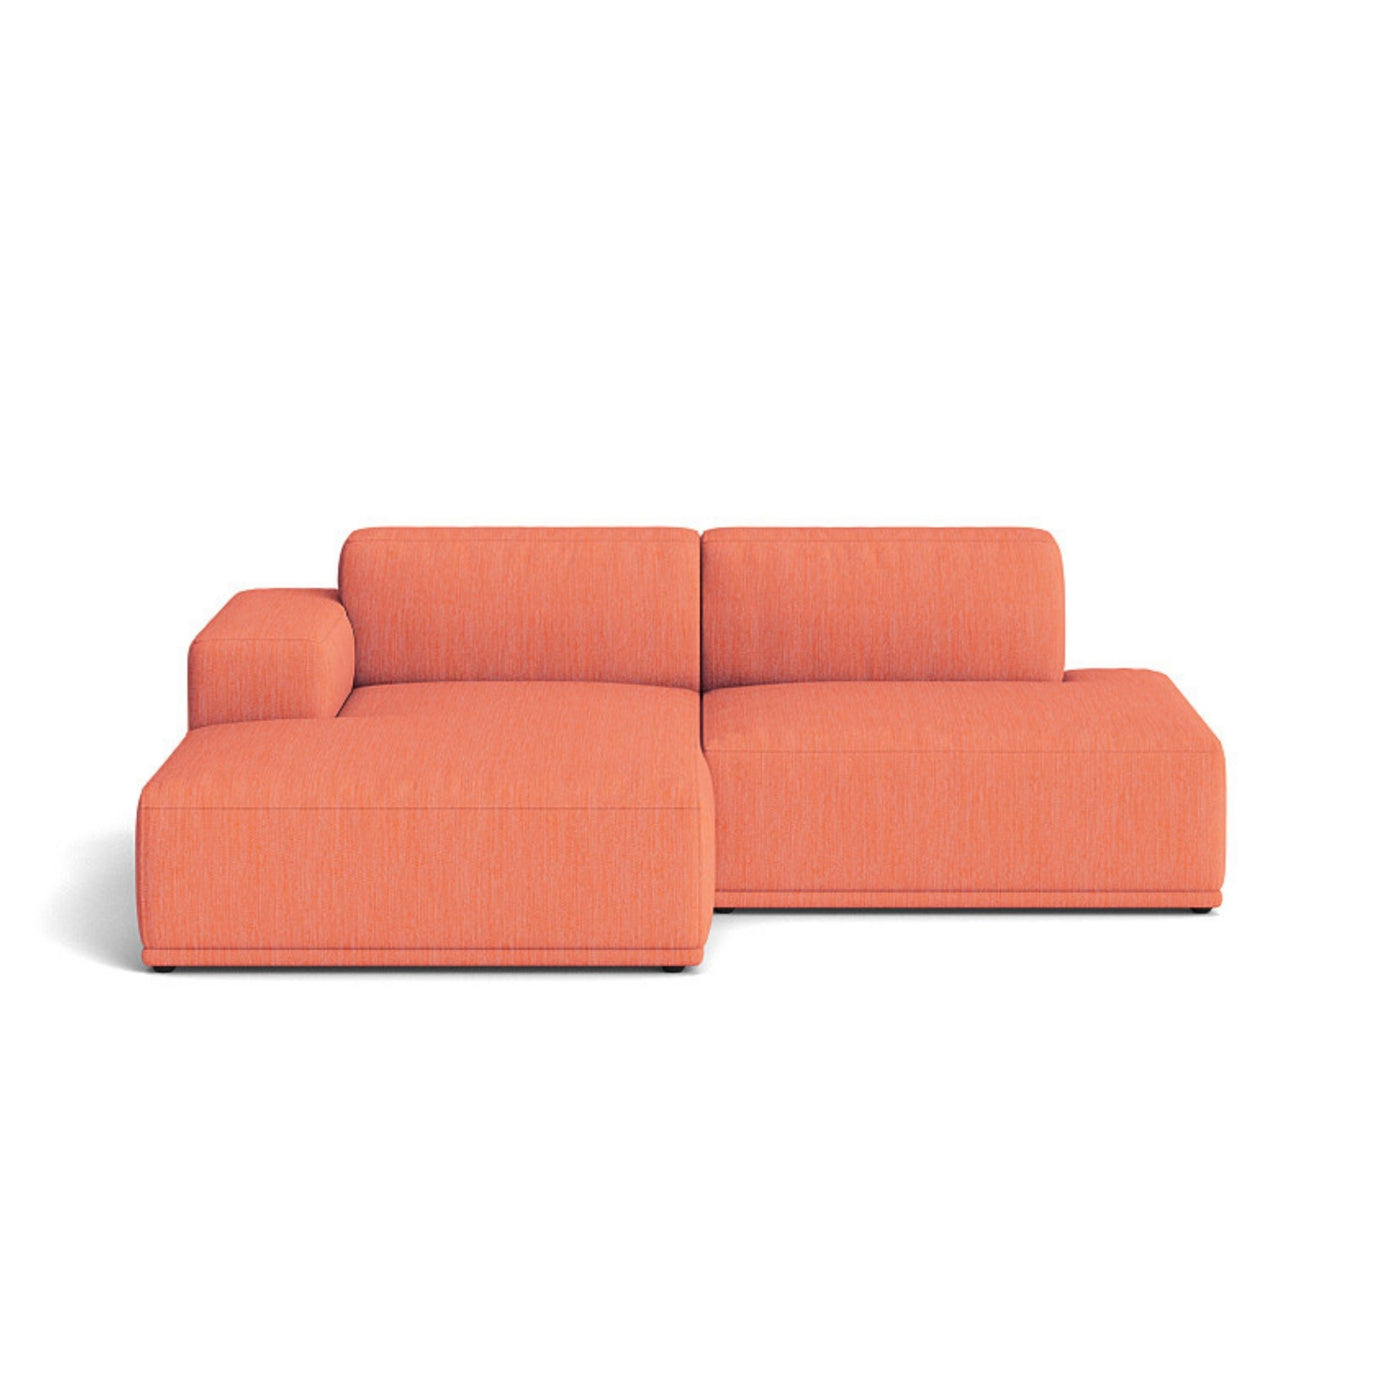 Muuto Connect Soft Modular 2 Seater Sofa, configuration 3. made-to-order from someday designs. #colour_balder-542